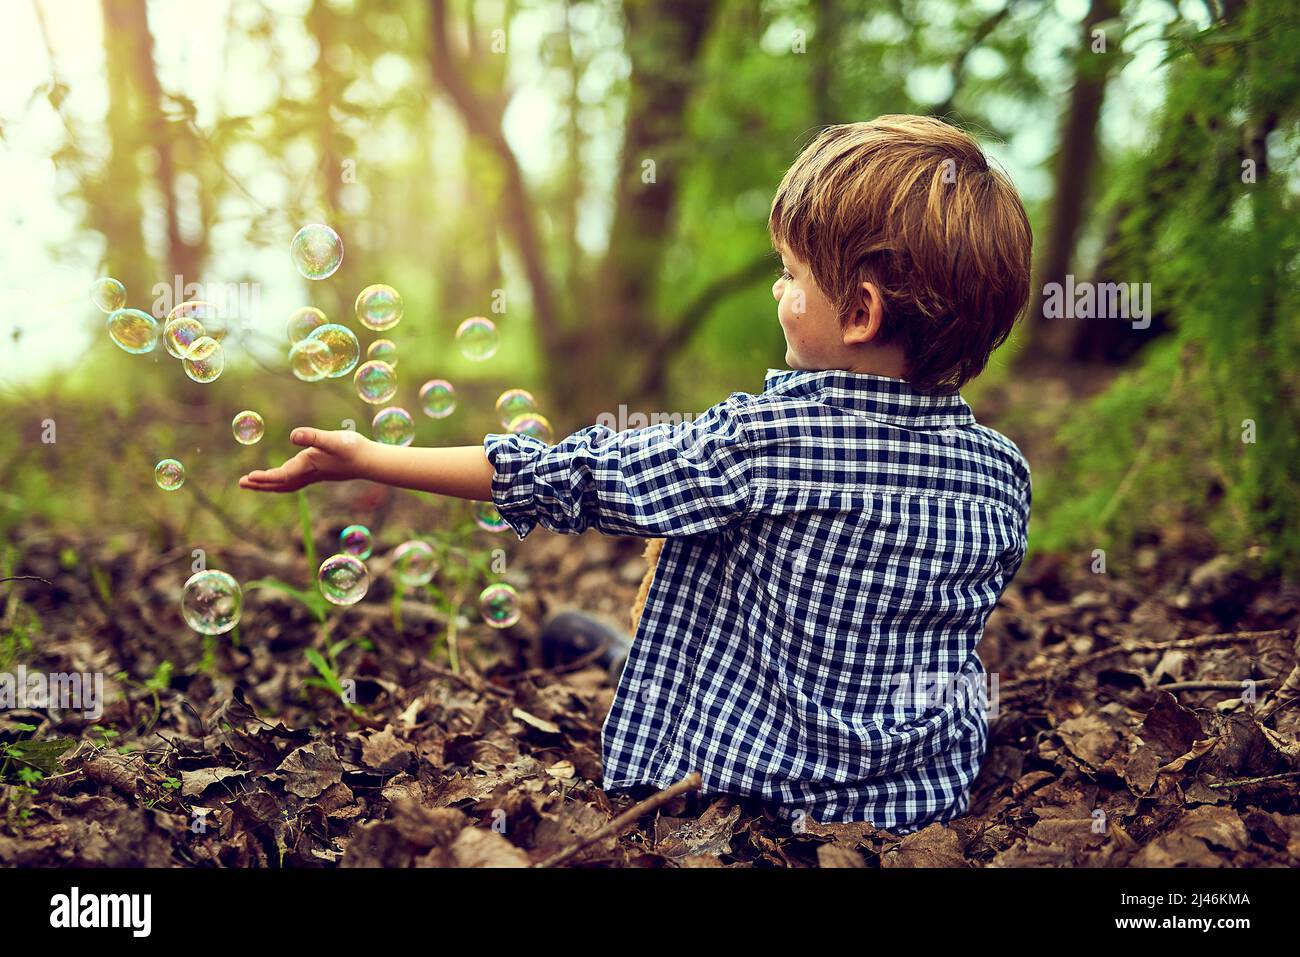 Fascinated by the magic of bubbles. Shot of a little boy playing with bubbles while sitting alone in the forest. Stock Photo